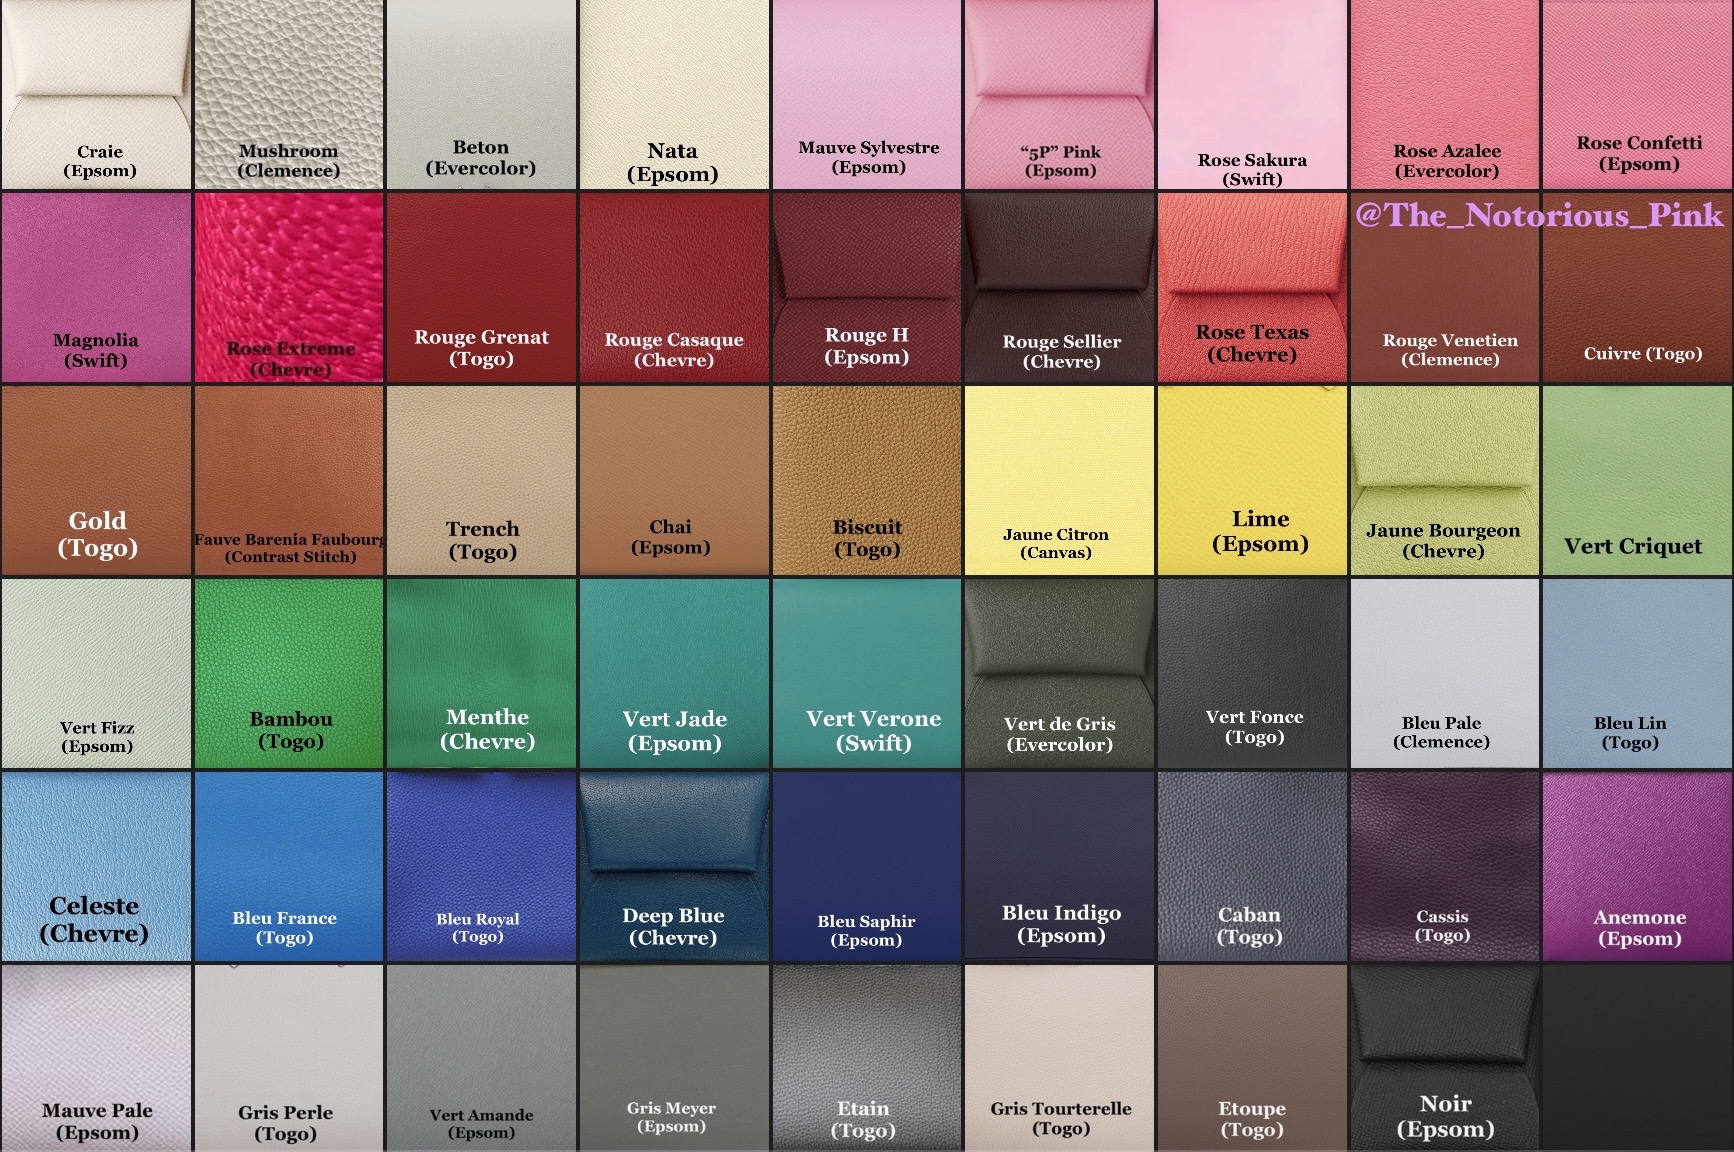 The range of leather colors currently being offered this season. Via @The_Notorious_Pink.